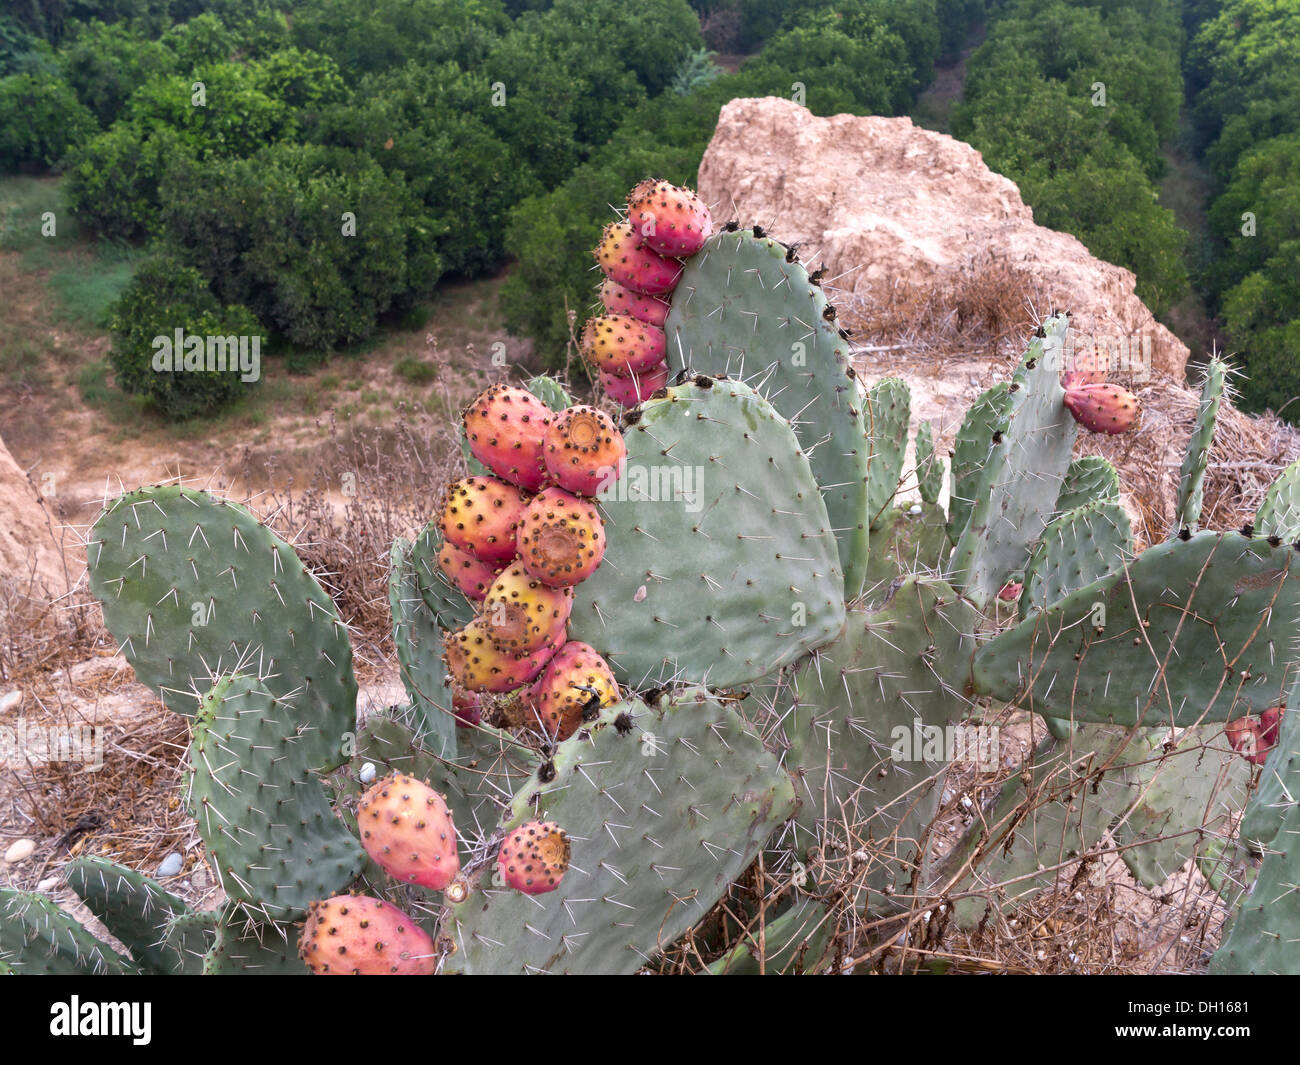 A detail of a of prickly pear plant with fruit Morocco Stock Photo